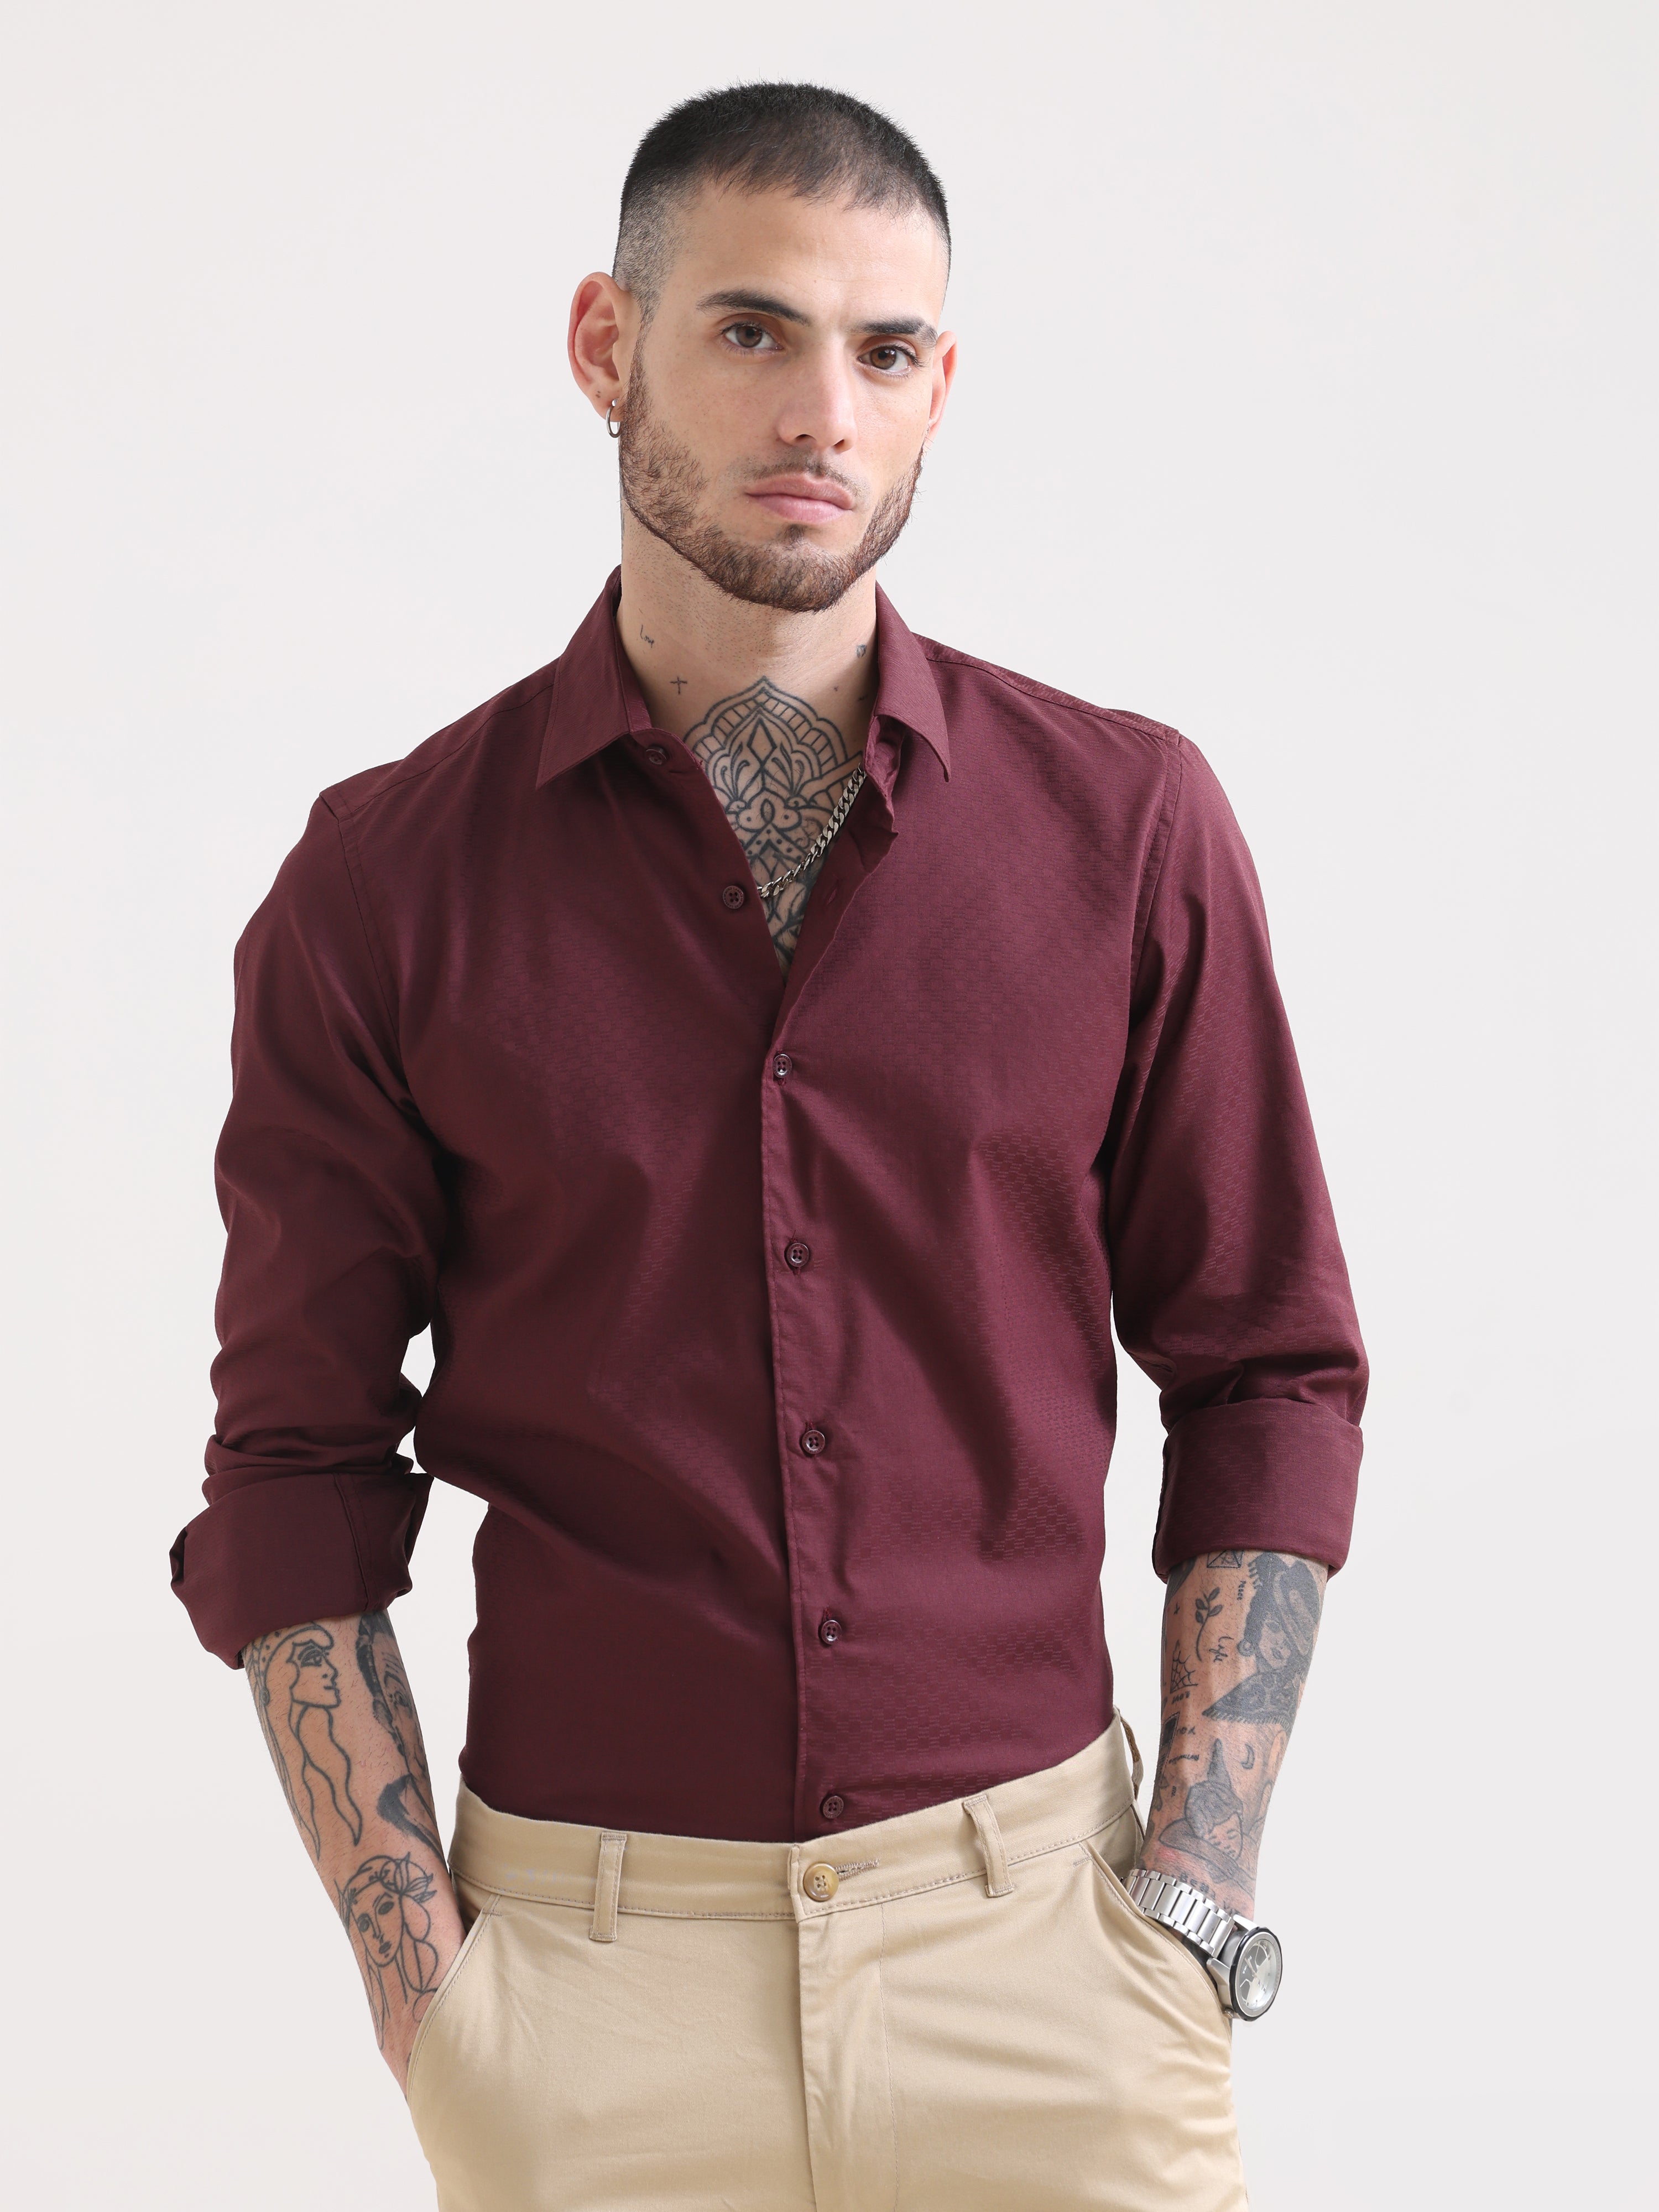 Currant Wine Textured Solid ShirtRs. 1399.00